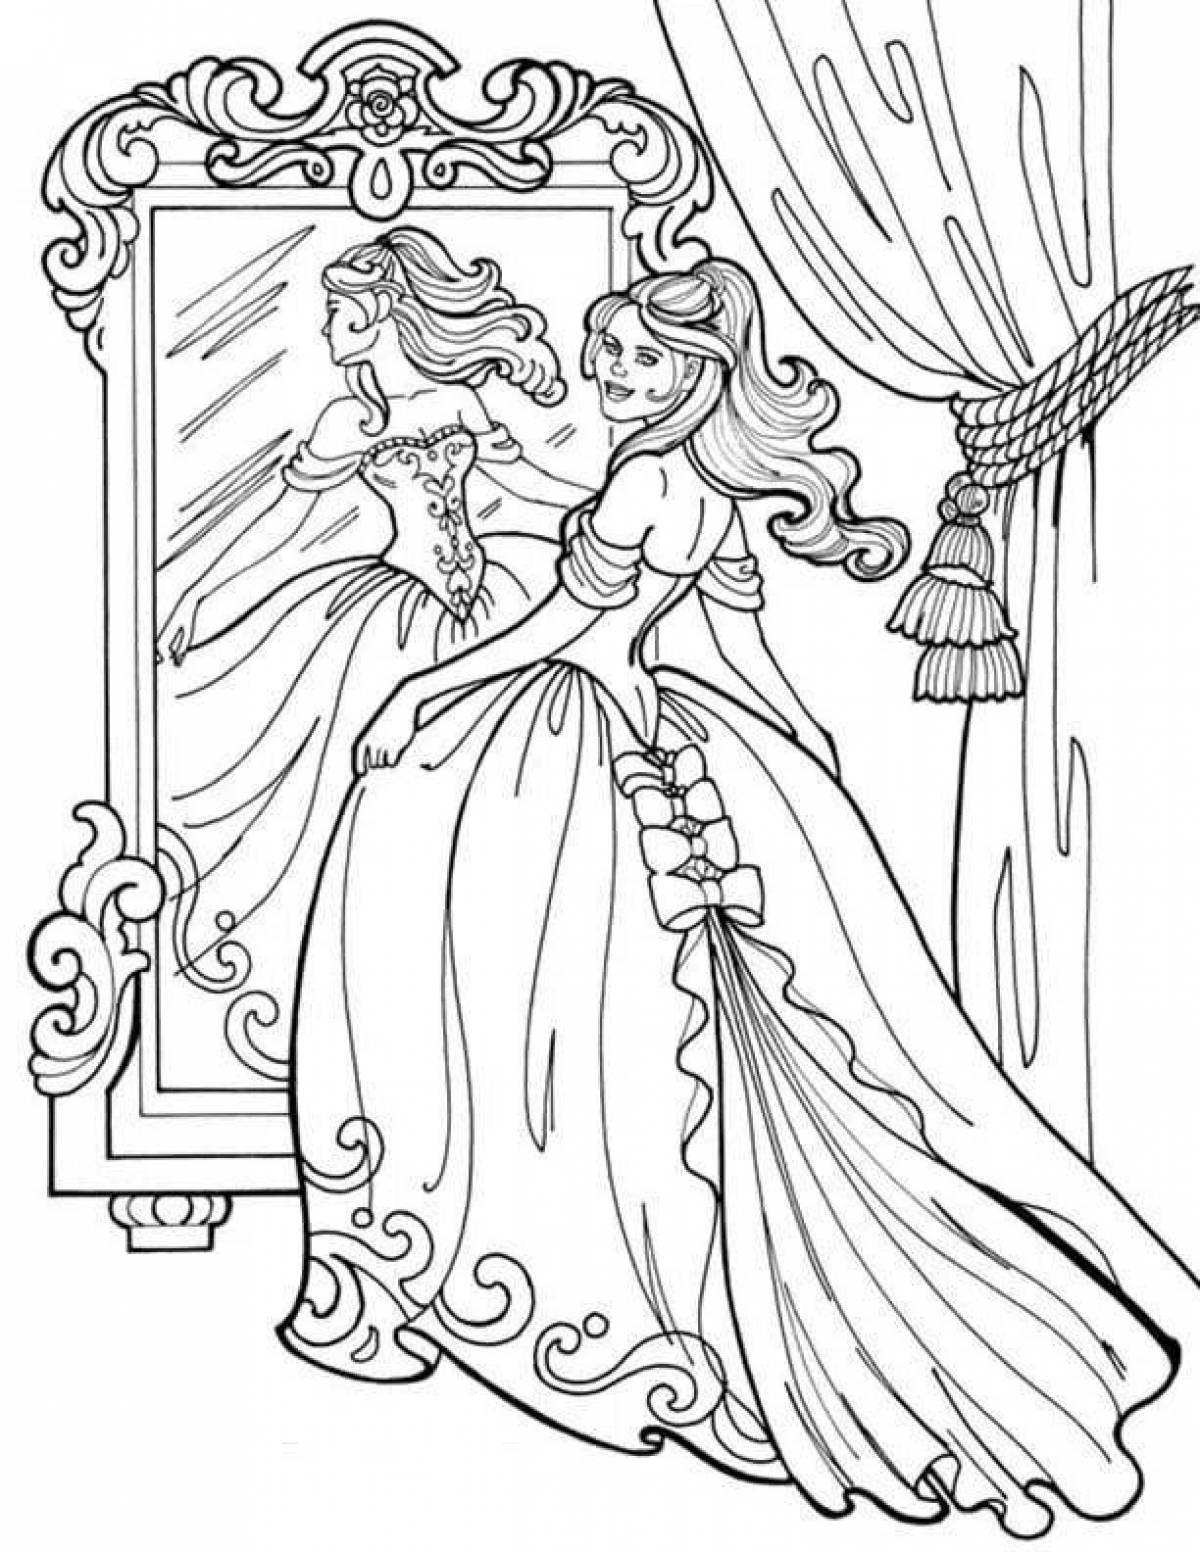 Coloring page exalted princess in the castle